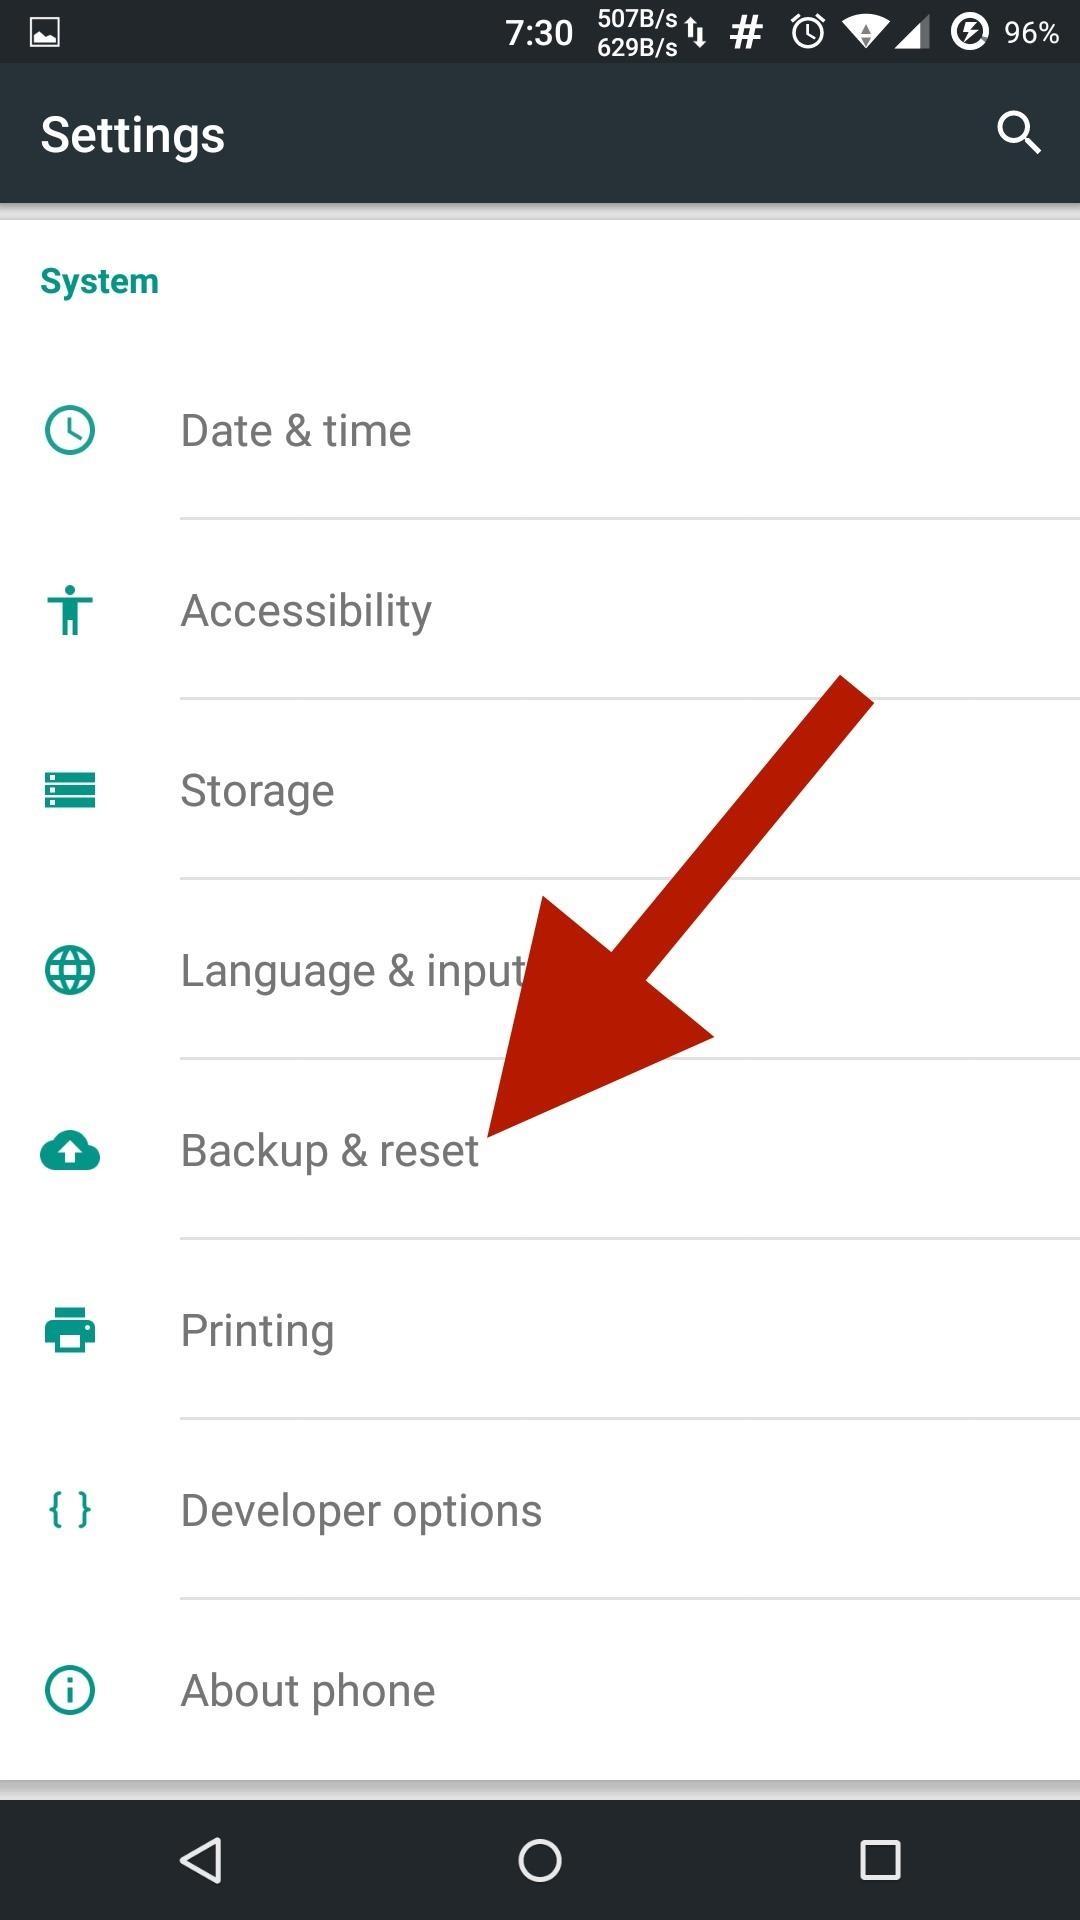 The Best Way to Wipe Data & Completely Delete Your Data on Android